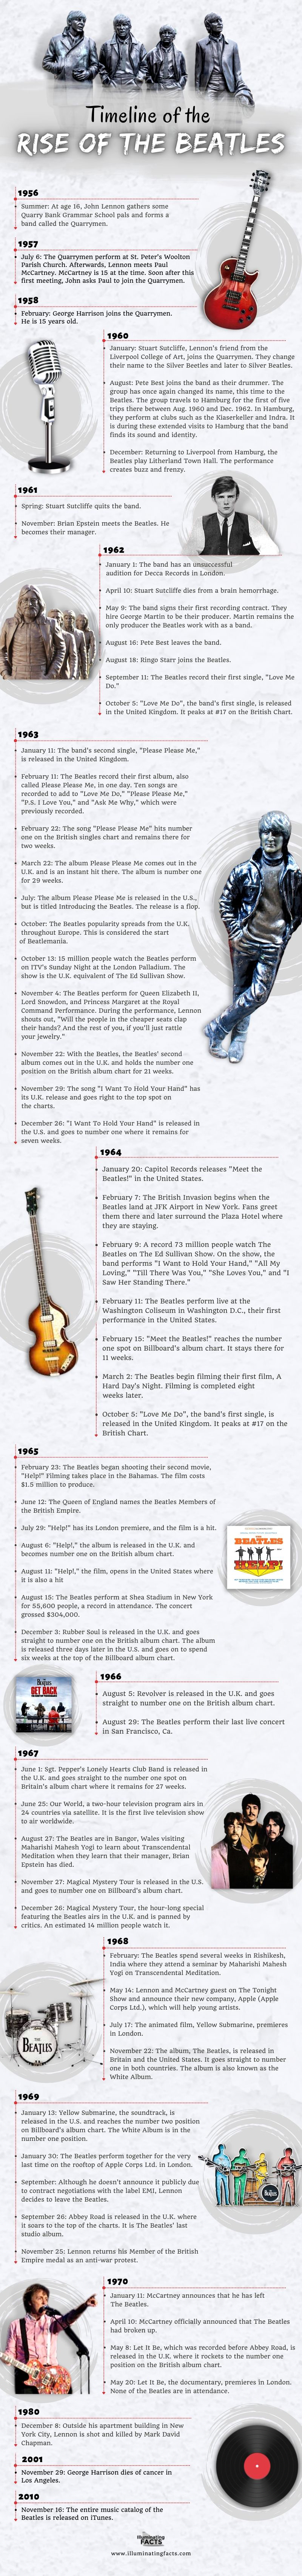 Timeline of the Rise of the Beatles